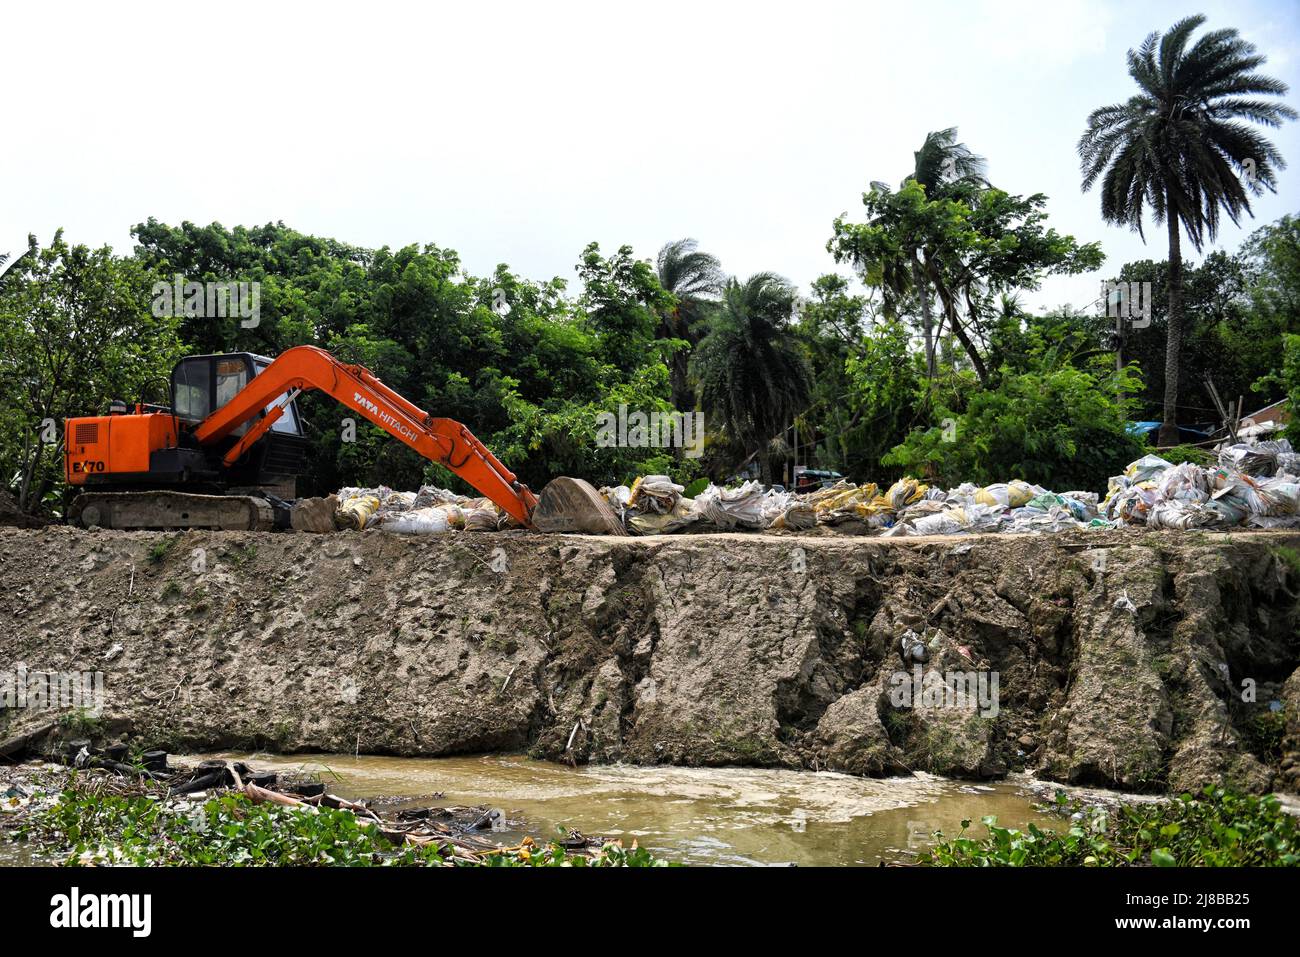 Hooghly, India. 14th May, 2022. A JCB (Joseph Cyril Bamford) machine seen working on the river bank of Ganges due to soil erosion. Extreme level of soil erosion seen on the river bank of Ganges near Hooghly, around 100km far away from the city Kolkata. River bank of Hooghly is highly vulnerable to climate and weather-related hazards due to its topography and geographical location. Credit: SOPA Images Limited/Alamy Live News Stock Photo